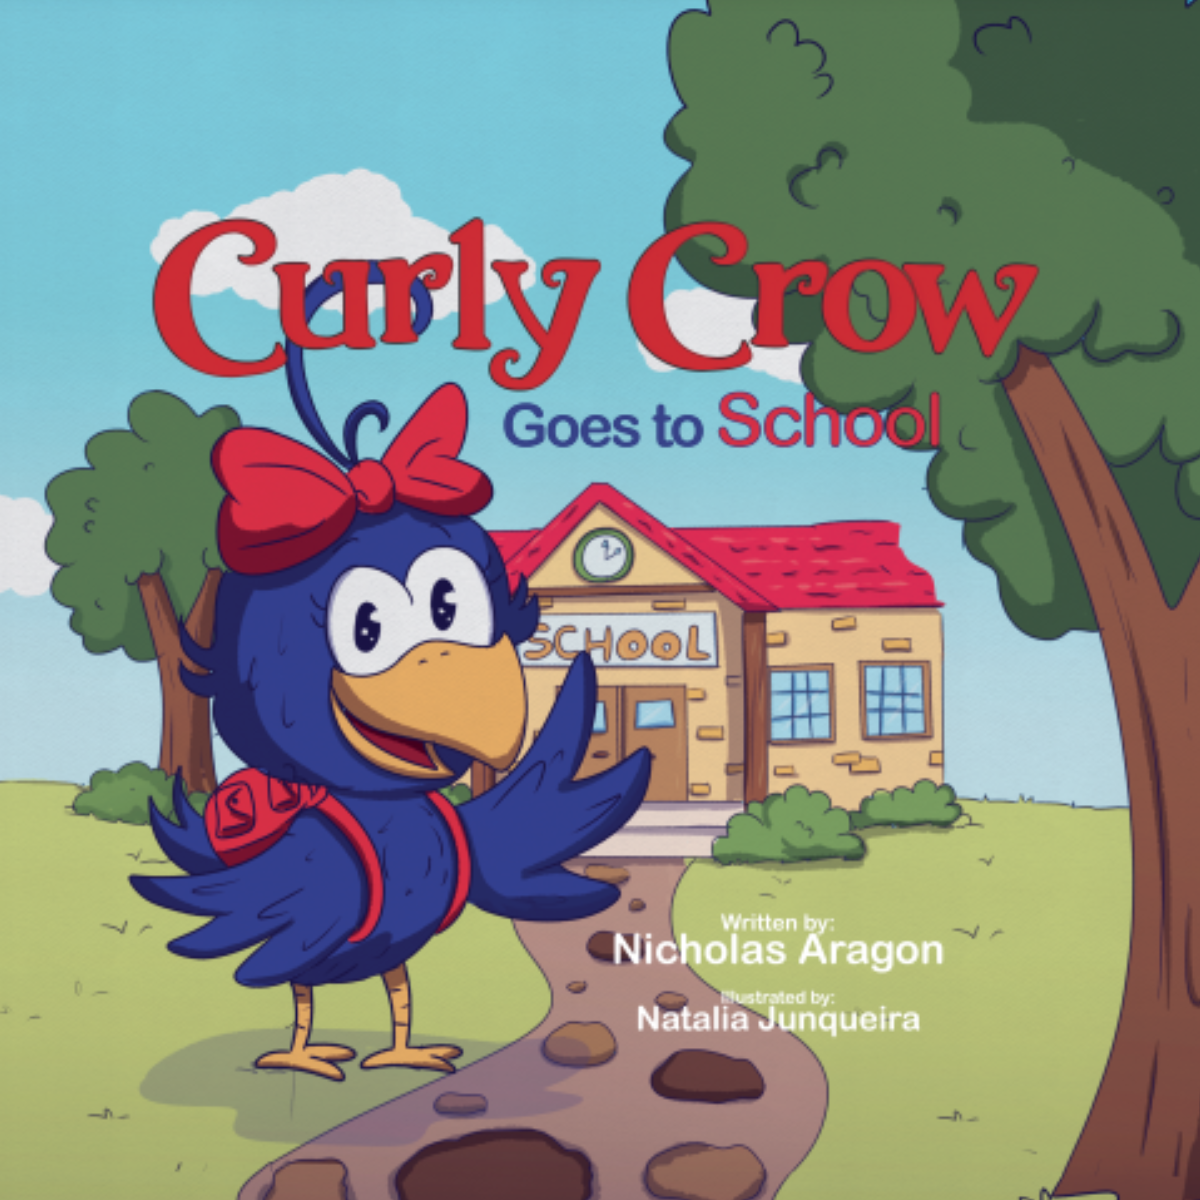 Curly Crow, a cheerful bird with curly feathers, embarks on exciting journeys in these colorful children's books